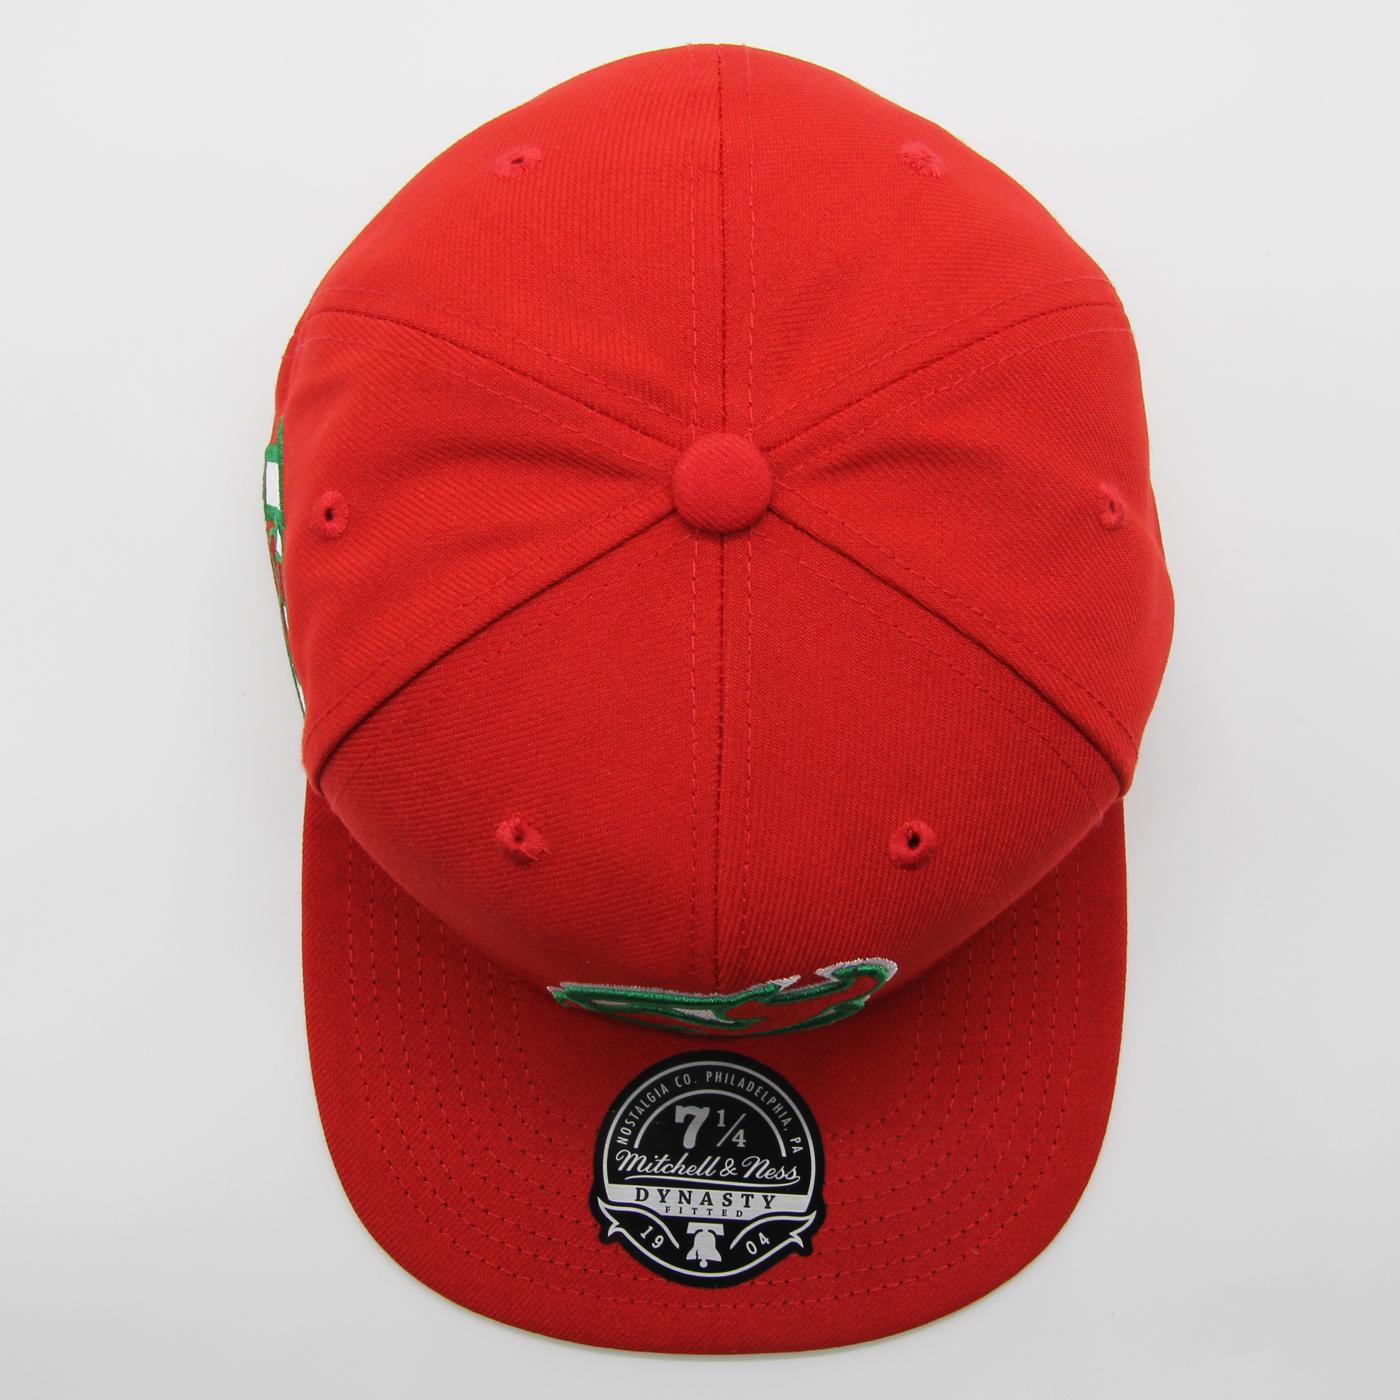 Mitchell & Ness NHL Vintage Fitted NJ Devils red